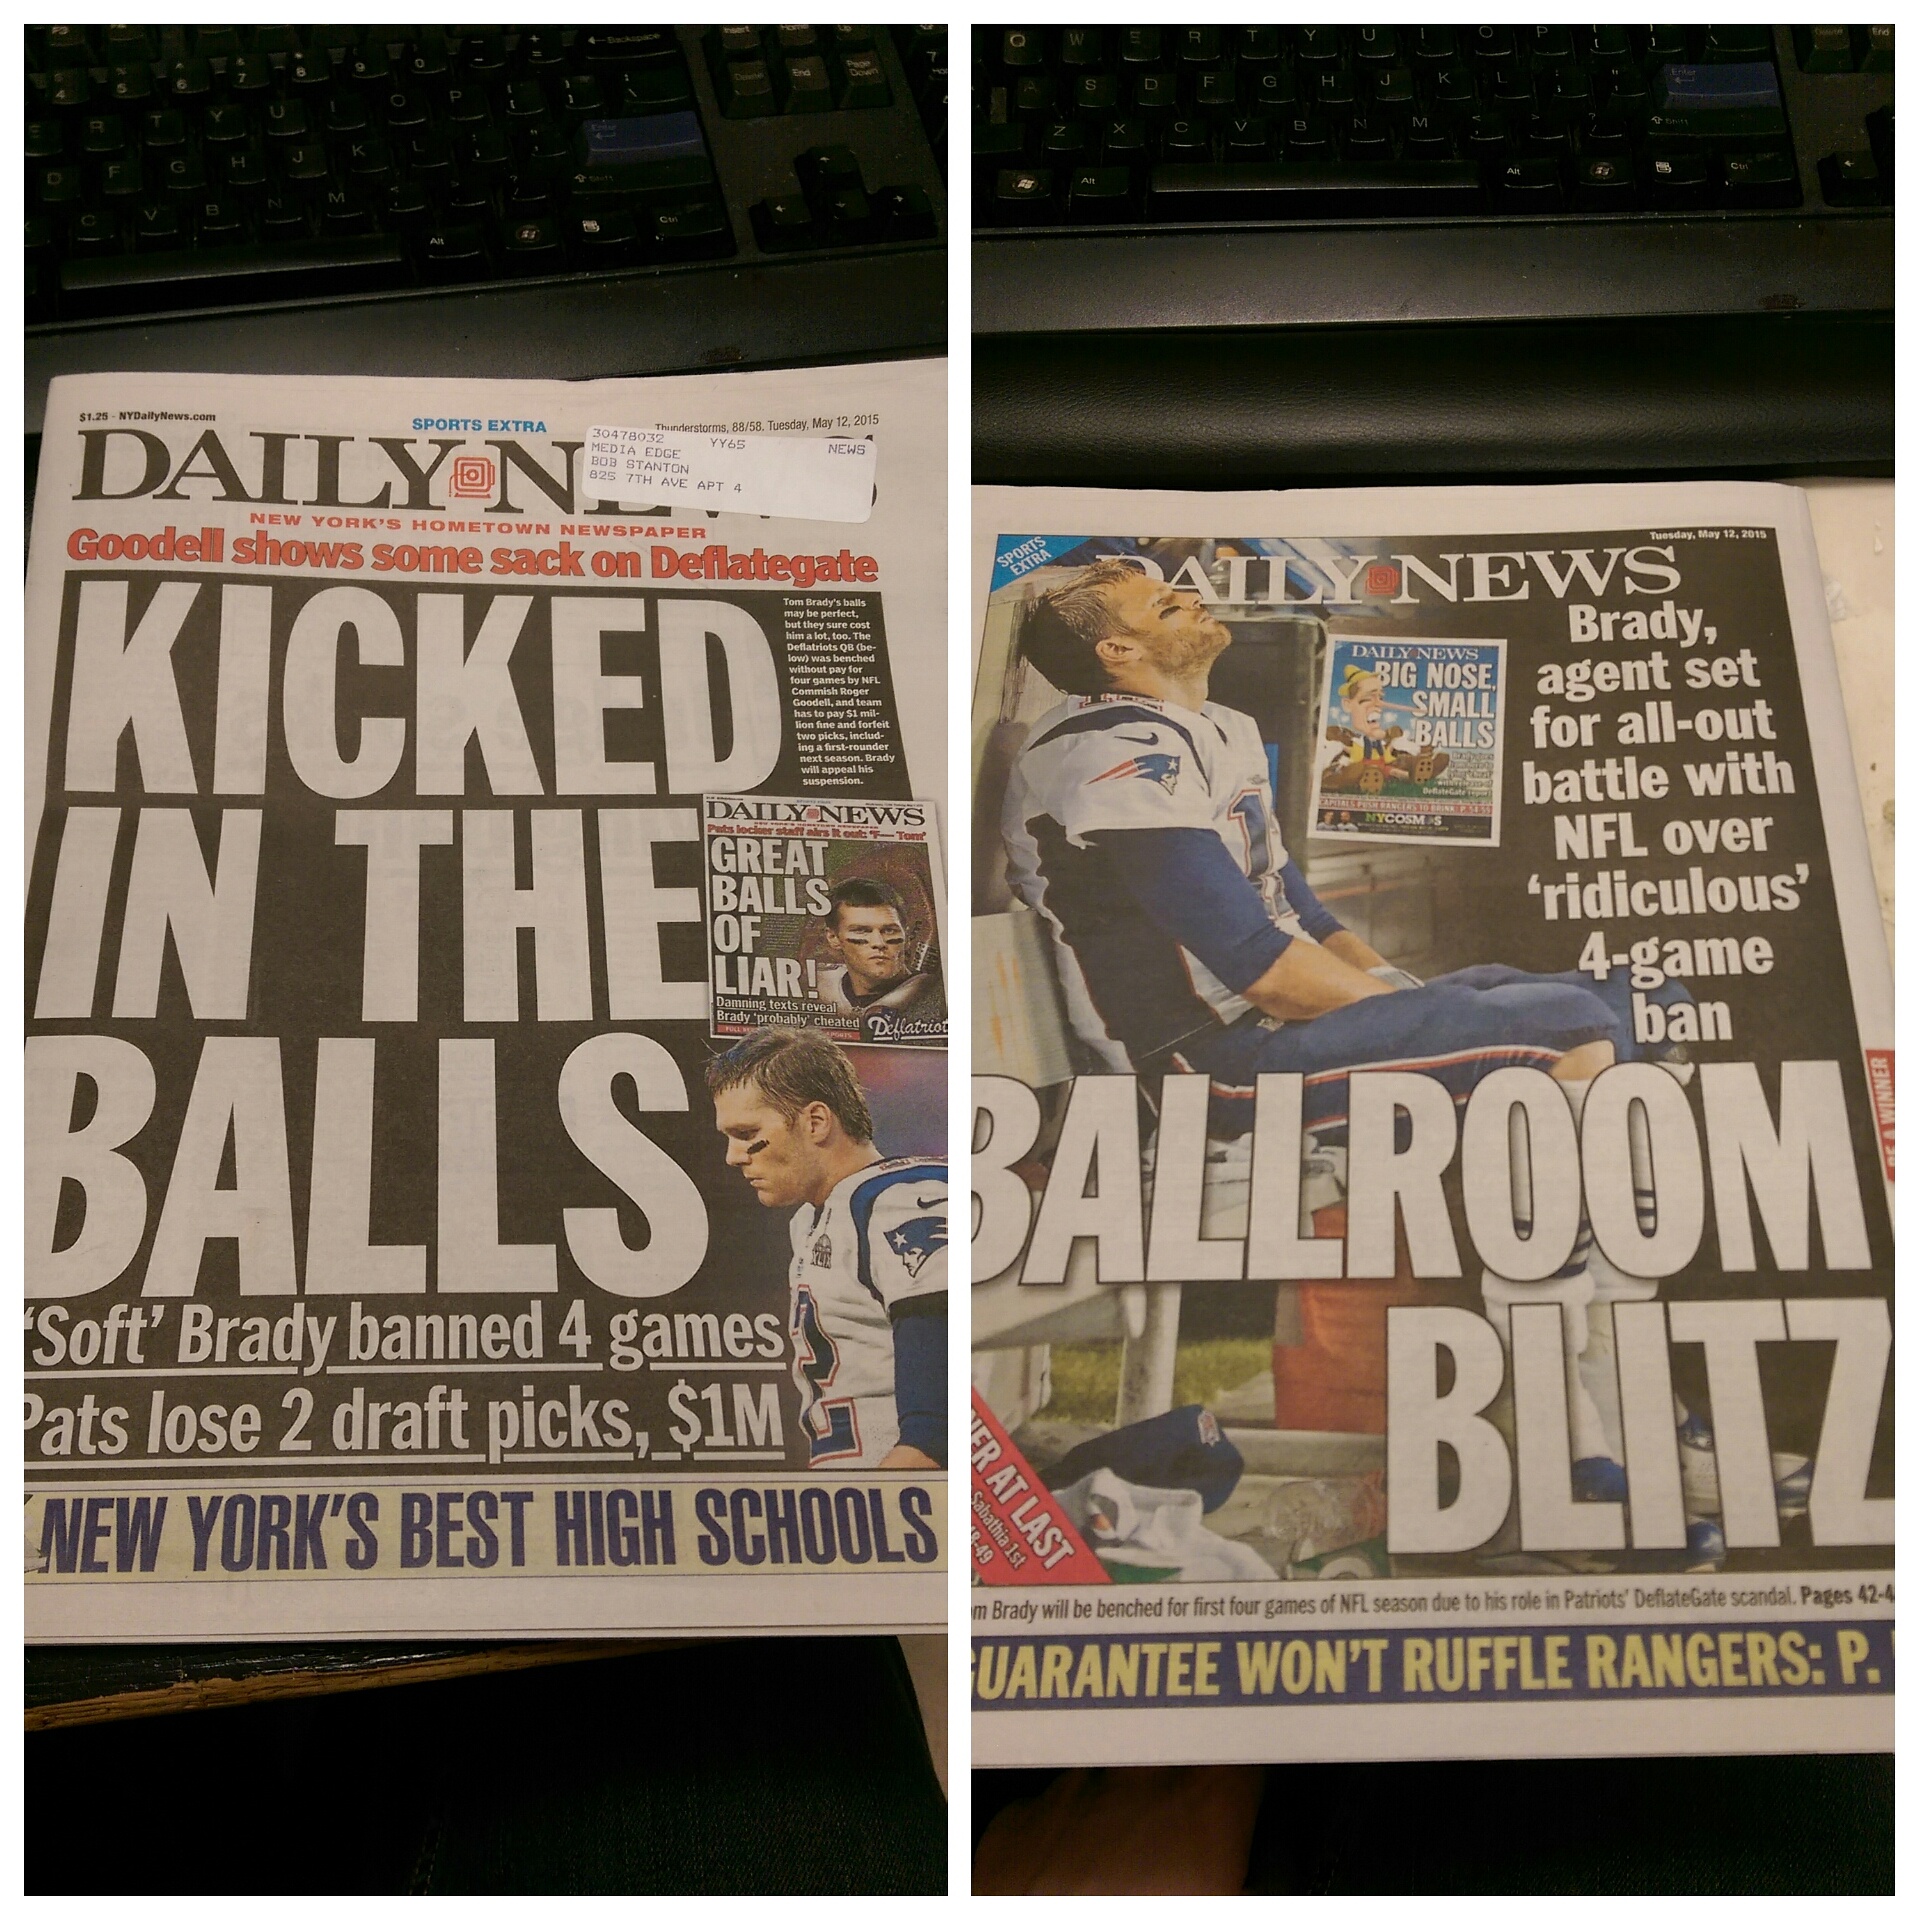 Brady's balls takes up 2 covers. Nothing on Nepal or Shell's artic drilling though.